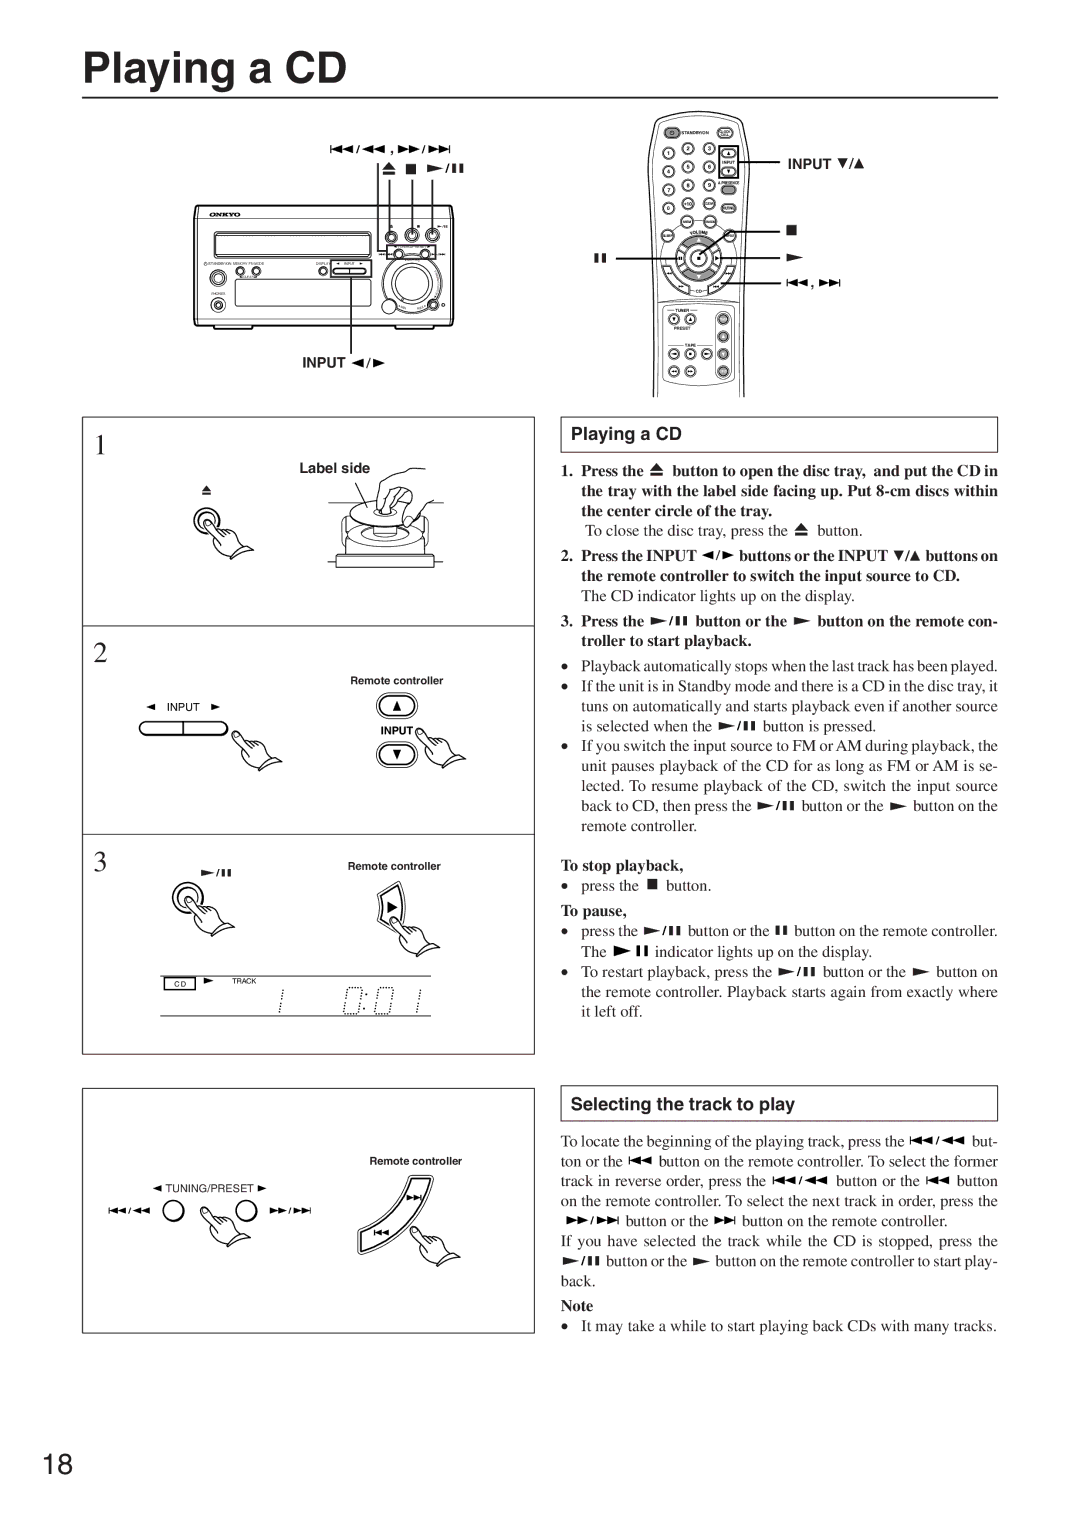 Onkyo CR-305FX instruction manual Playing a CD, Selecting the track to play, To stop playback, To pause 